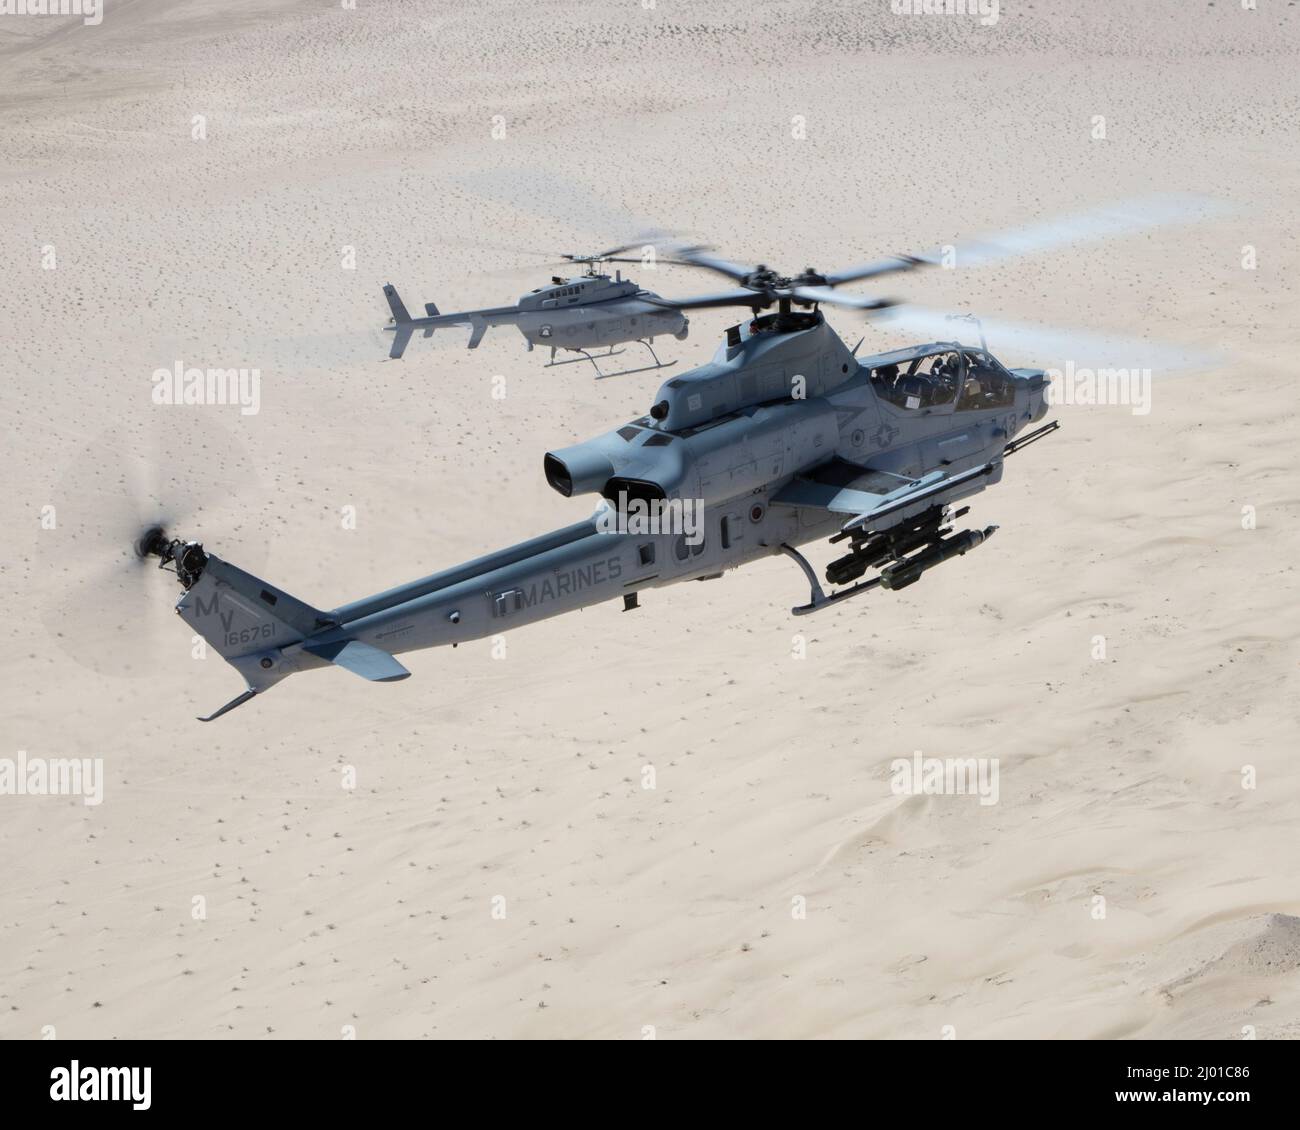 An AH-1Z Viper (front) with Marine Operational and Test Evaluation Squadron 1 (VMX-1), and an MQ-8C Fire Scout unmanned helicopter assigned to Helicopter Sea Combat Squadron 23 (HSC-23), conduct Strike Coordination and Reconnaissance Training near El Centro, California, March 10, 2022. The purpose of this exercise was to provide familiarization and concept development of manned-unmanned teaming. (U.S. Marine Corps photo by Lance Cpl. Jade Venegas) Stock Photo